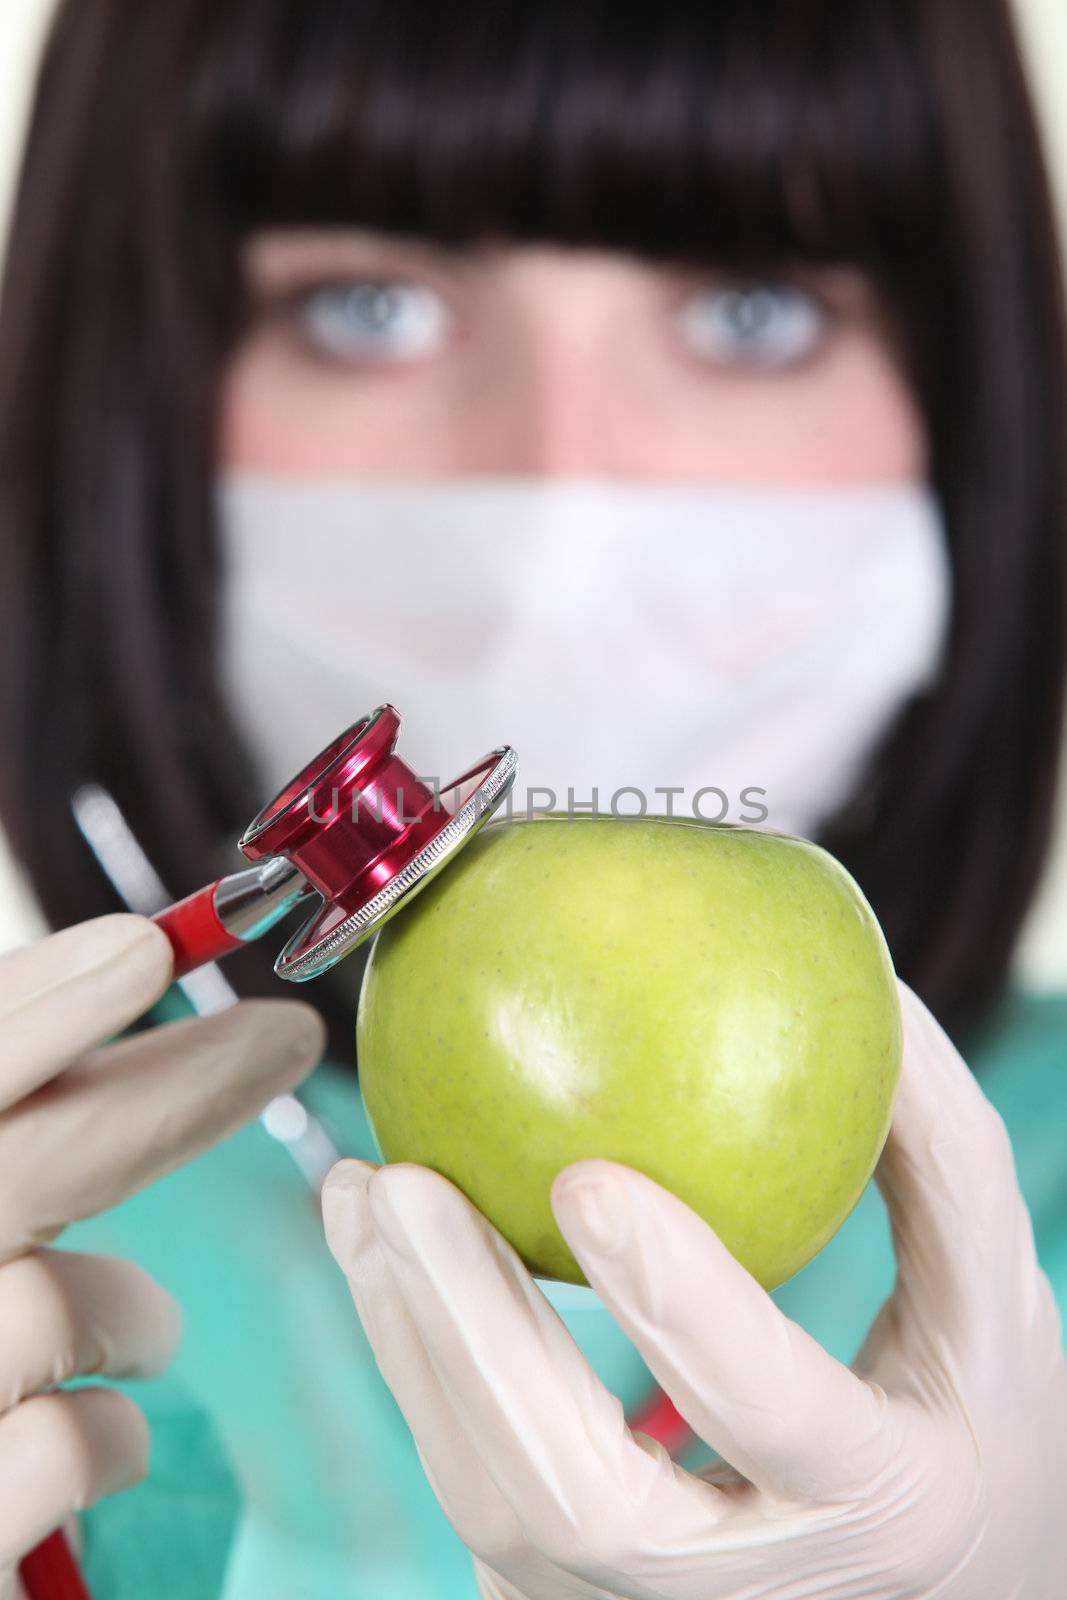 Medic using a stethoscope on an apple by phovoir